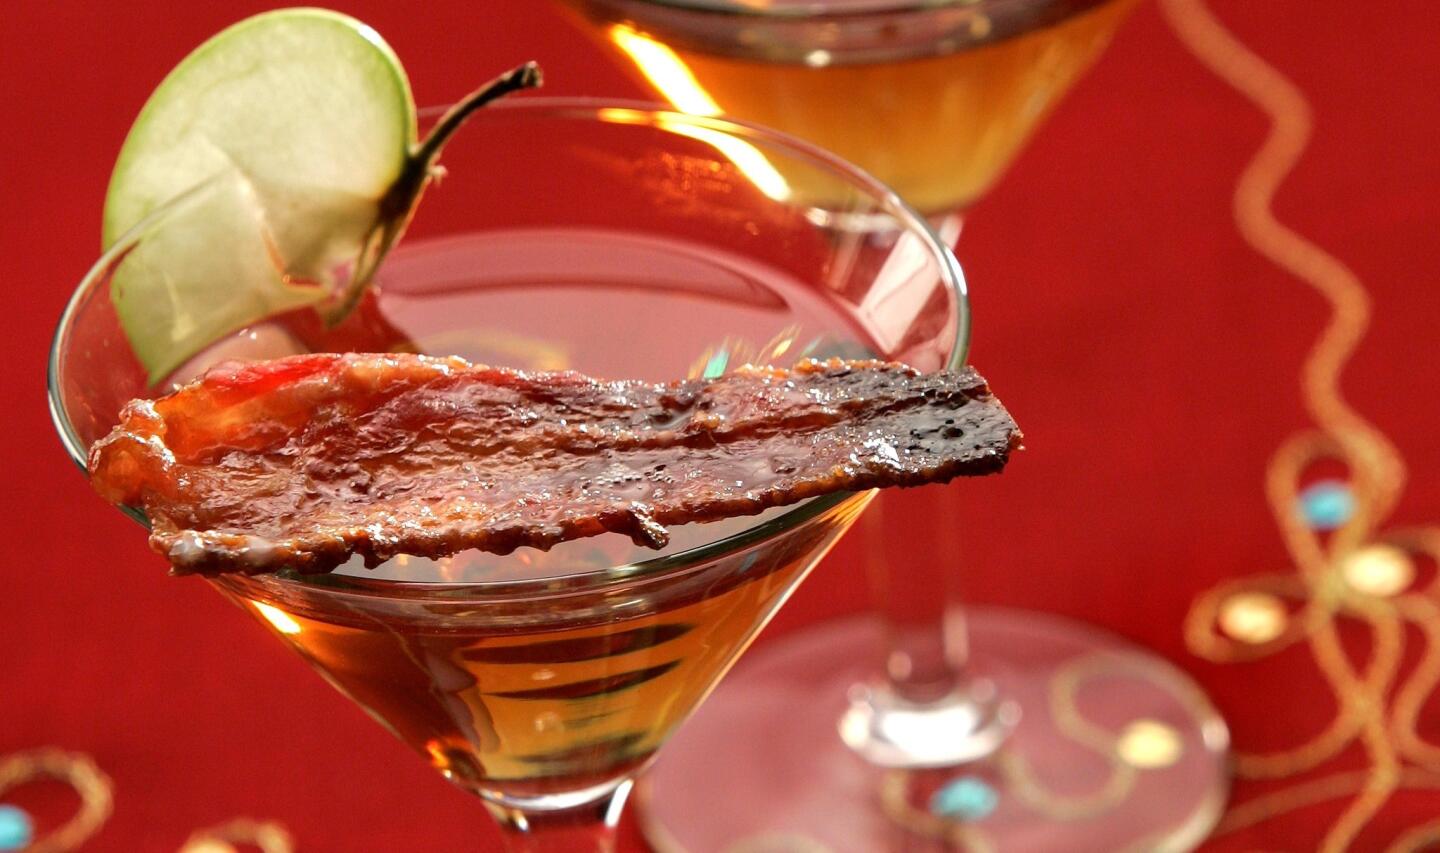 The best way to add a little nicotine-free smoke to a party is bacon. Serve guests candied smoked bacon martinis.